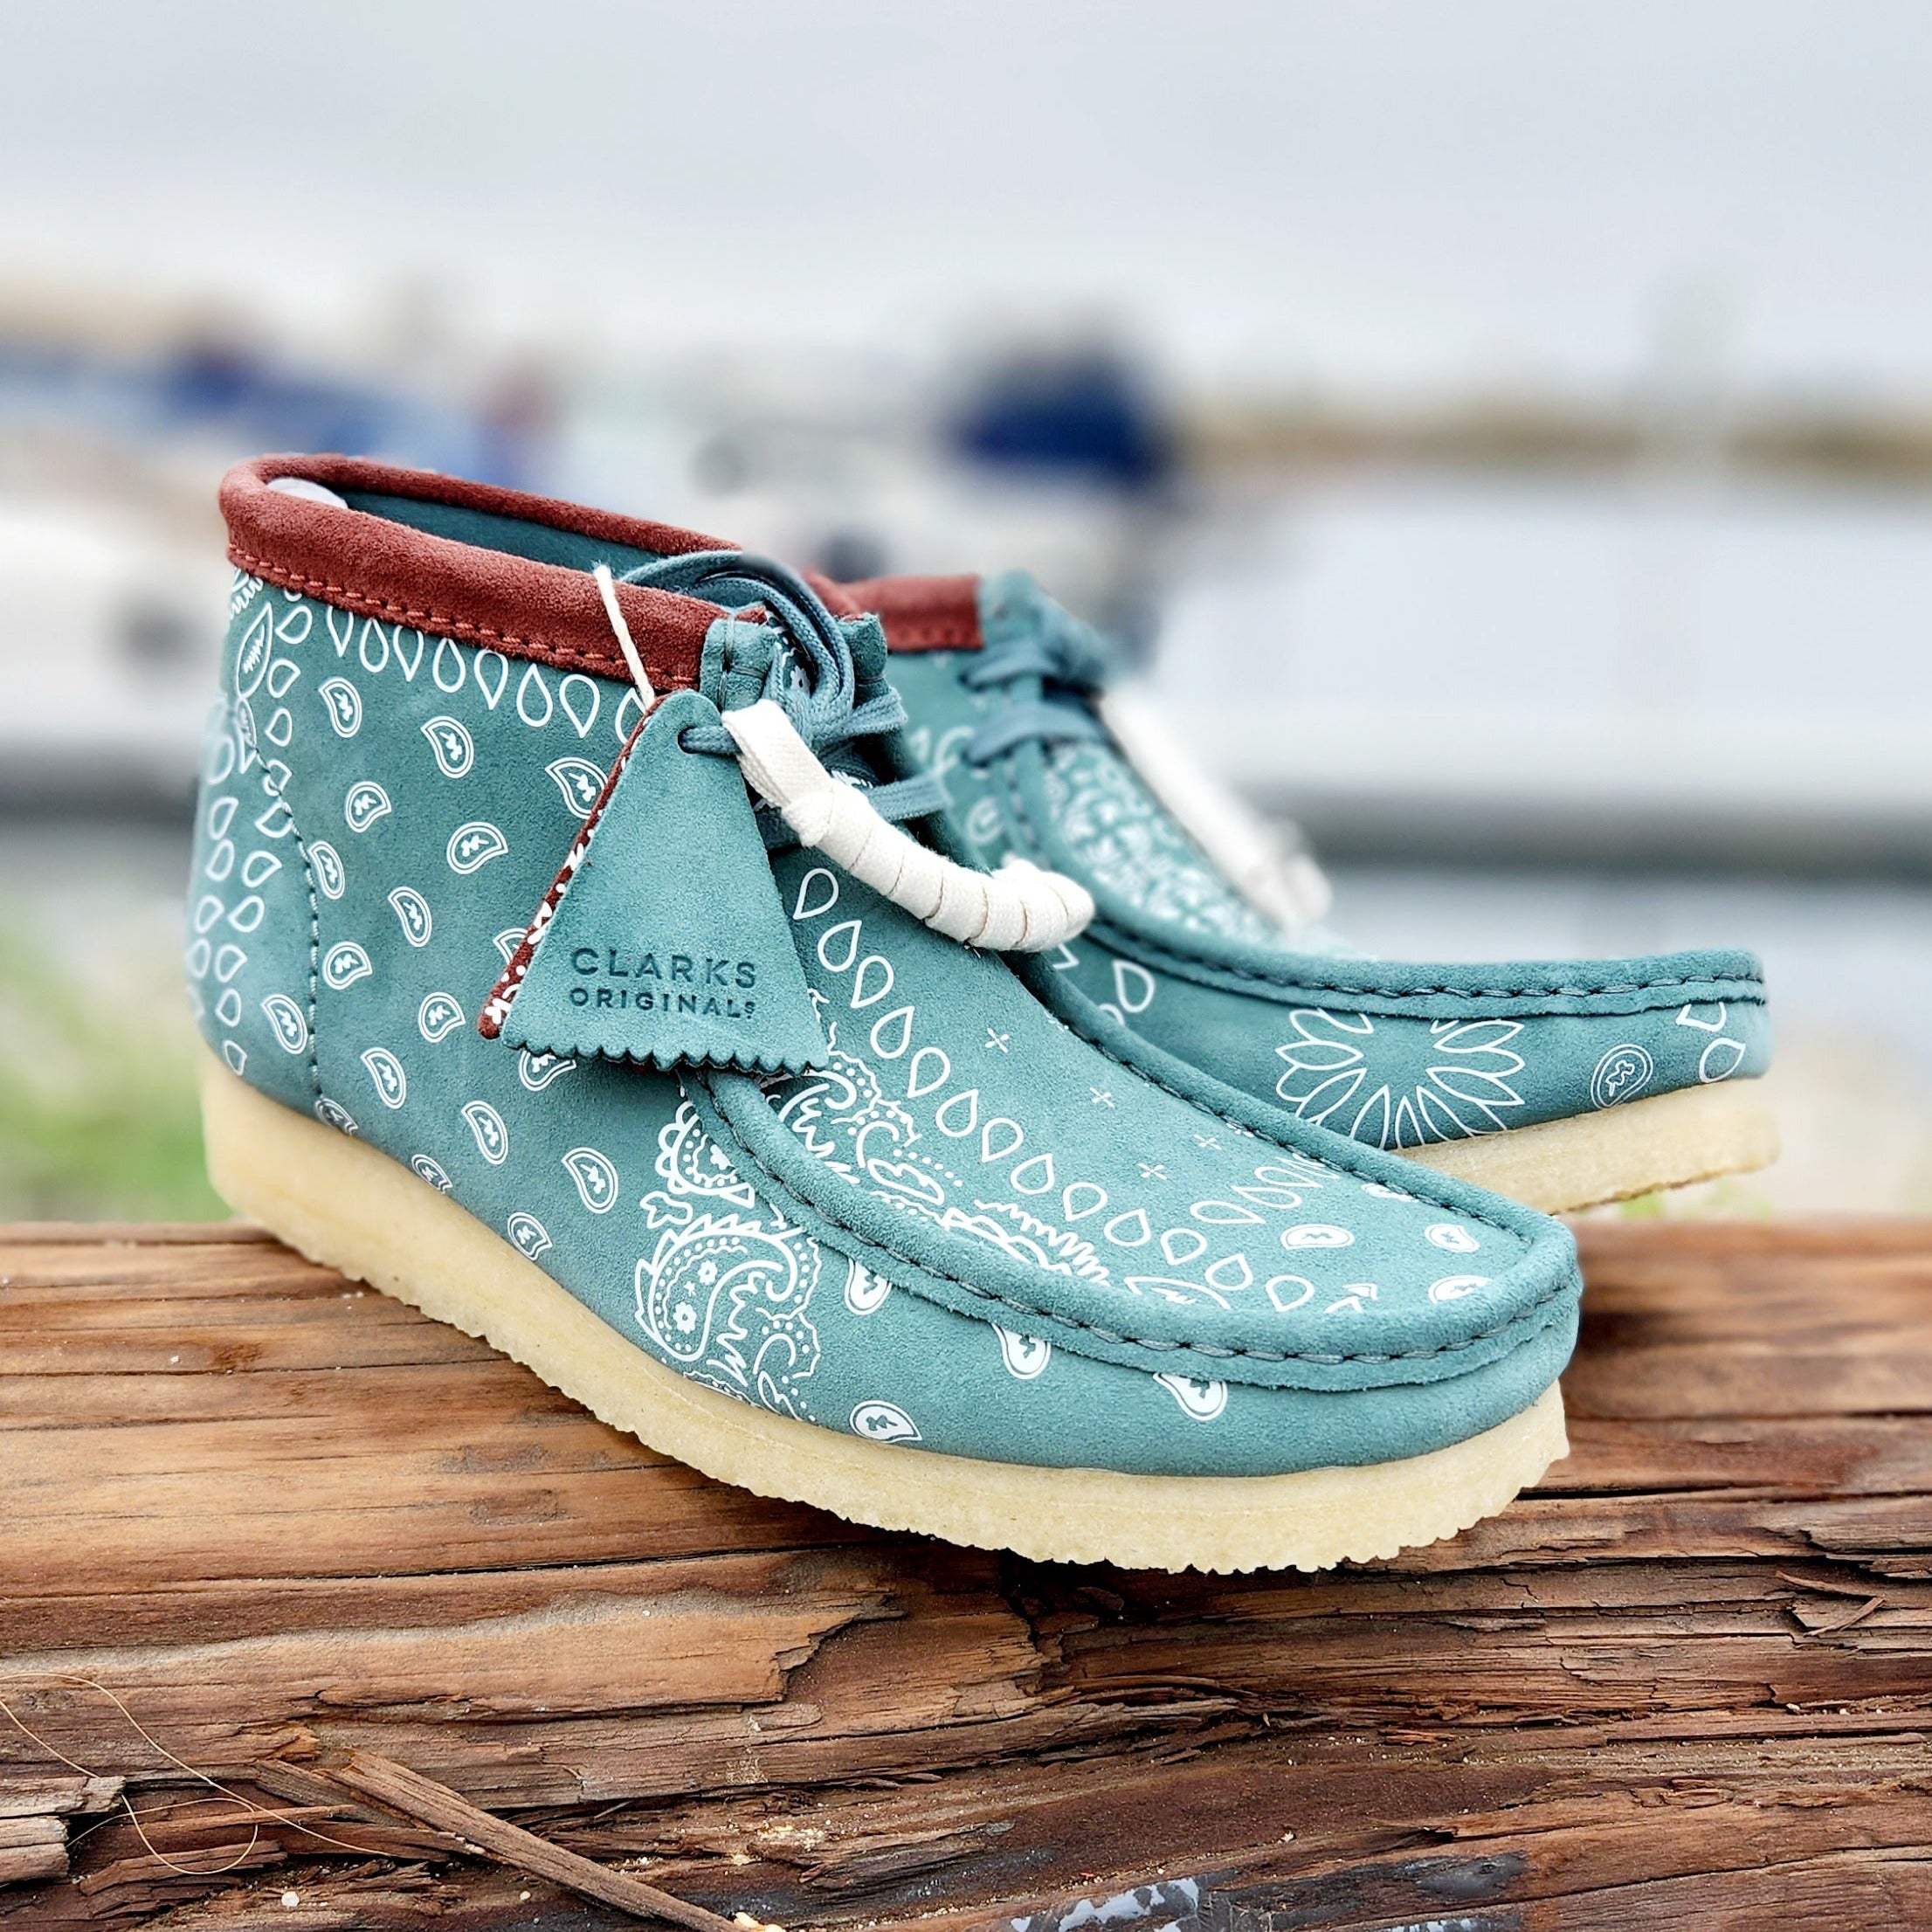 Clarks Wallabee Boot Green Paisley PRIVATE SNEAKERS